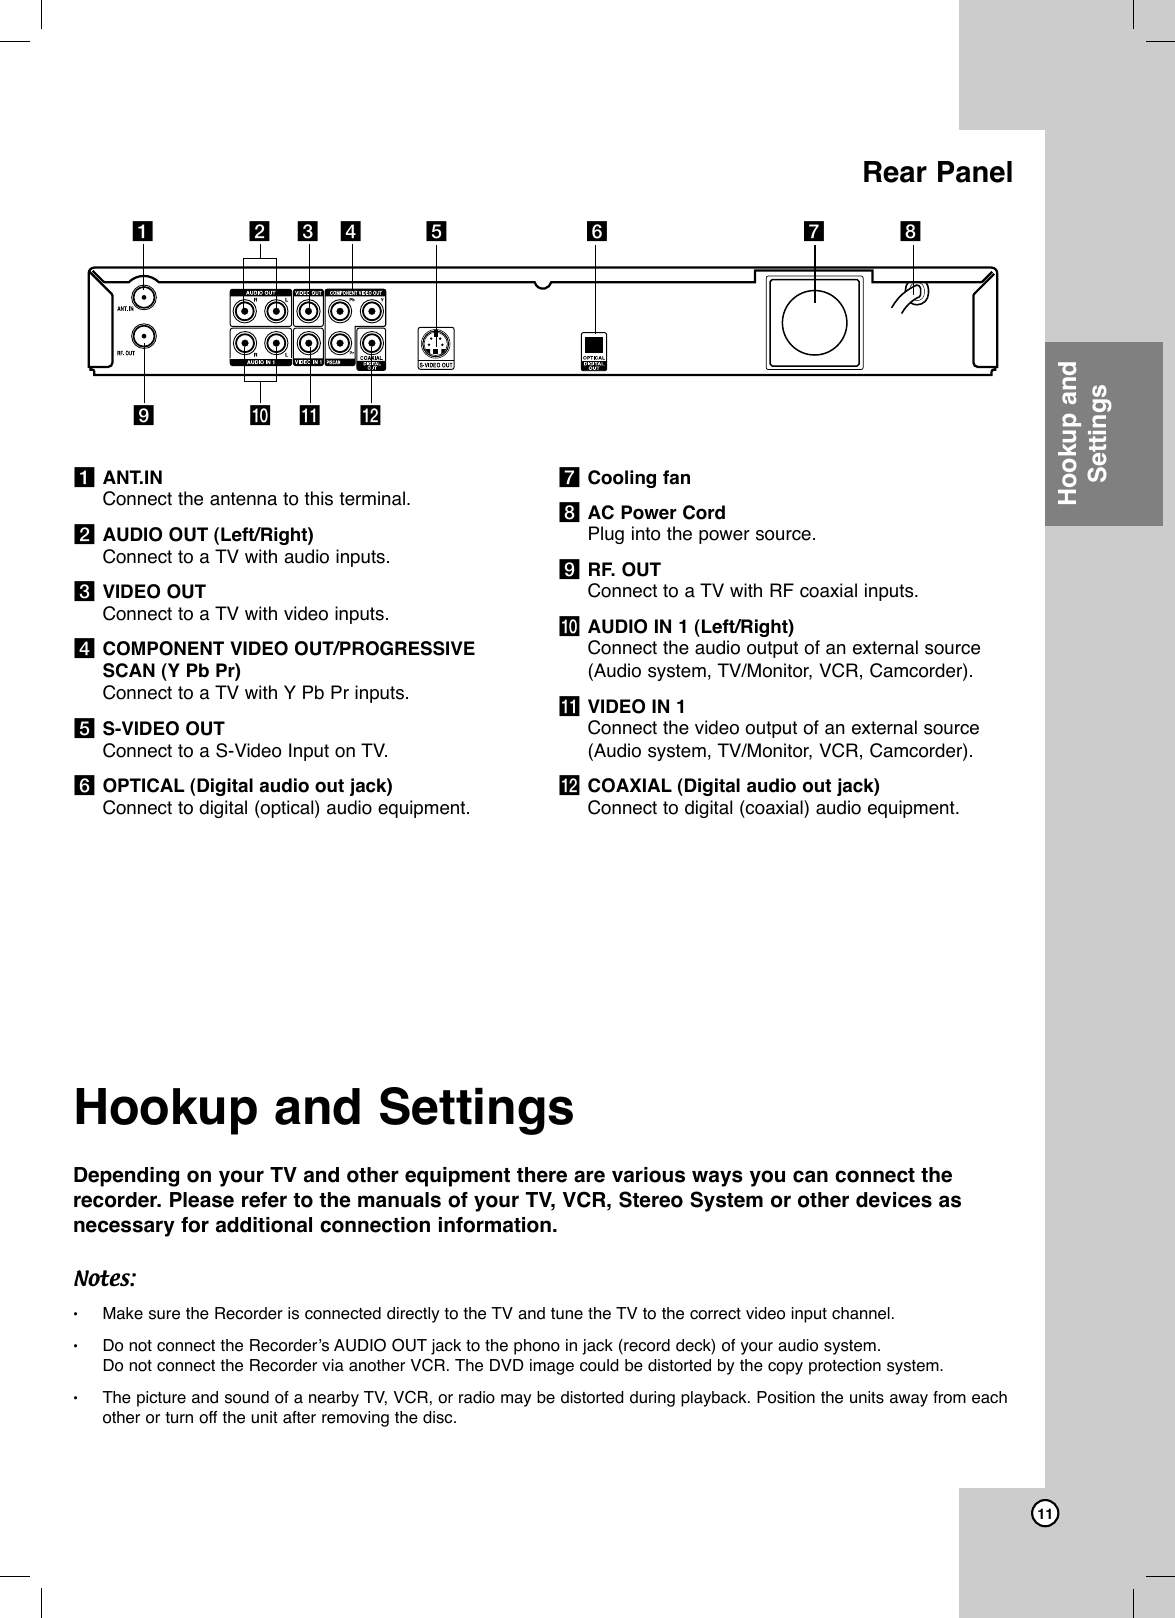 11Hookup andSettingsaANT.INConnect the antenna to this terminal.bAUDIO OUT (Left/Right)Connect to a TV with audio inputs.cVIDEO OUTConnect to a TV with video inputs.dCOMPONENT VIDEO OUT/PROGRESSIVESCAN (Y Pb Pr)Connect to a TV with Y Pb Pr inputs.eS-VIDEO OUTConnect to a S-Video Input on TV.fOPTICAL (Digital audio out jack) Connect to digital (optical) audio equipment.gCooling fanhAC Power CordPlug into the power source.iRF. OUTConnect to a TV with RF coaxial inputs.jAUDIO IN 1 (Left/Right)Connect the audio output of an external source(Audio system, TV/Monitor, VCR, Camcorder).kVIDEO IN 1Connect the video output of an external source(Audio system, TV/Monitor, VCR, Camcorder).lCOAXIAL (Digital audio out jack) Connect to digital (coaxial) audio equipment.abcde f ghijklRear PanelHookup and SettingsDepending on your TV and other equipment there are various ways you can connect therecorder. Please refer to the manuals of your TV, VCR, Stereo System or other devices asnecessary for additional connection information.Notes:•Make sure the Recorder is connected directly to the TV and tune the TV to the correct video input channel. •Do not connect the Recorder’s AUDIO OUT jack to the phono in jack (record deck) of your audio system. Do not connect the Recorder via another VCR. The DVD image could be distorted by the copy protection system. •The picture and sound of a nearby TV, VCR, or radio may be distorted during playback. Position the units away from eachother or turn off the unit after removing the disc.